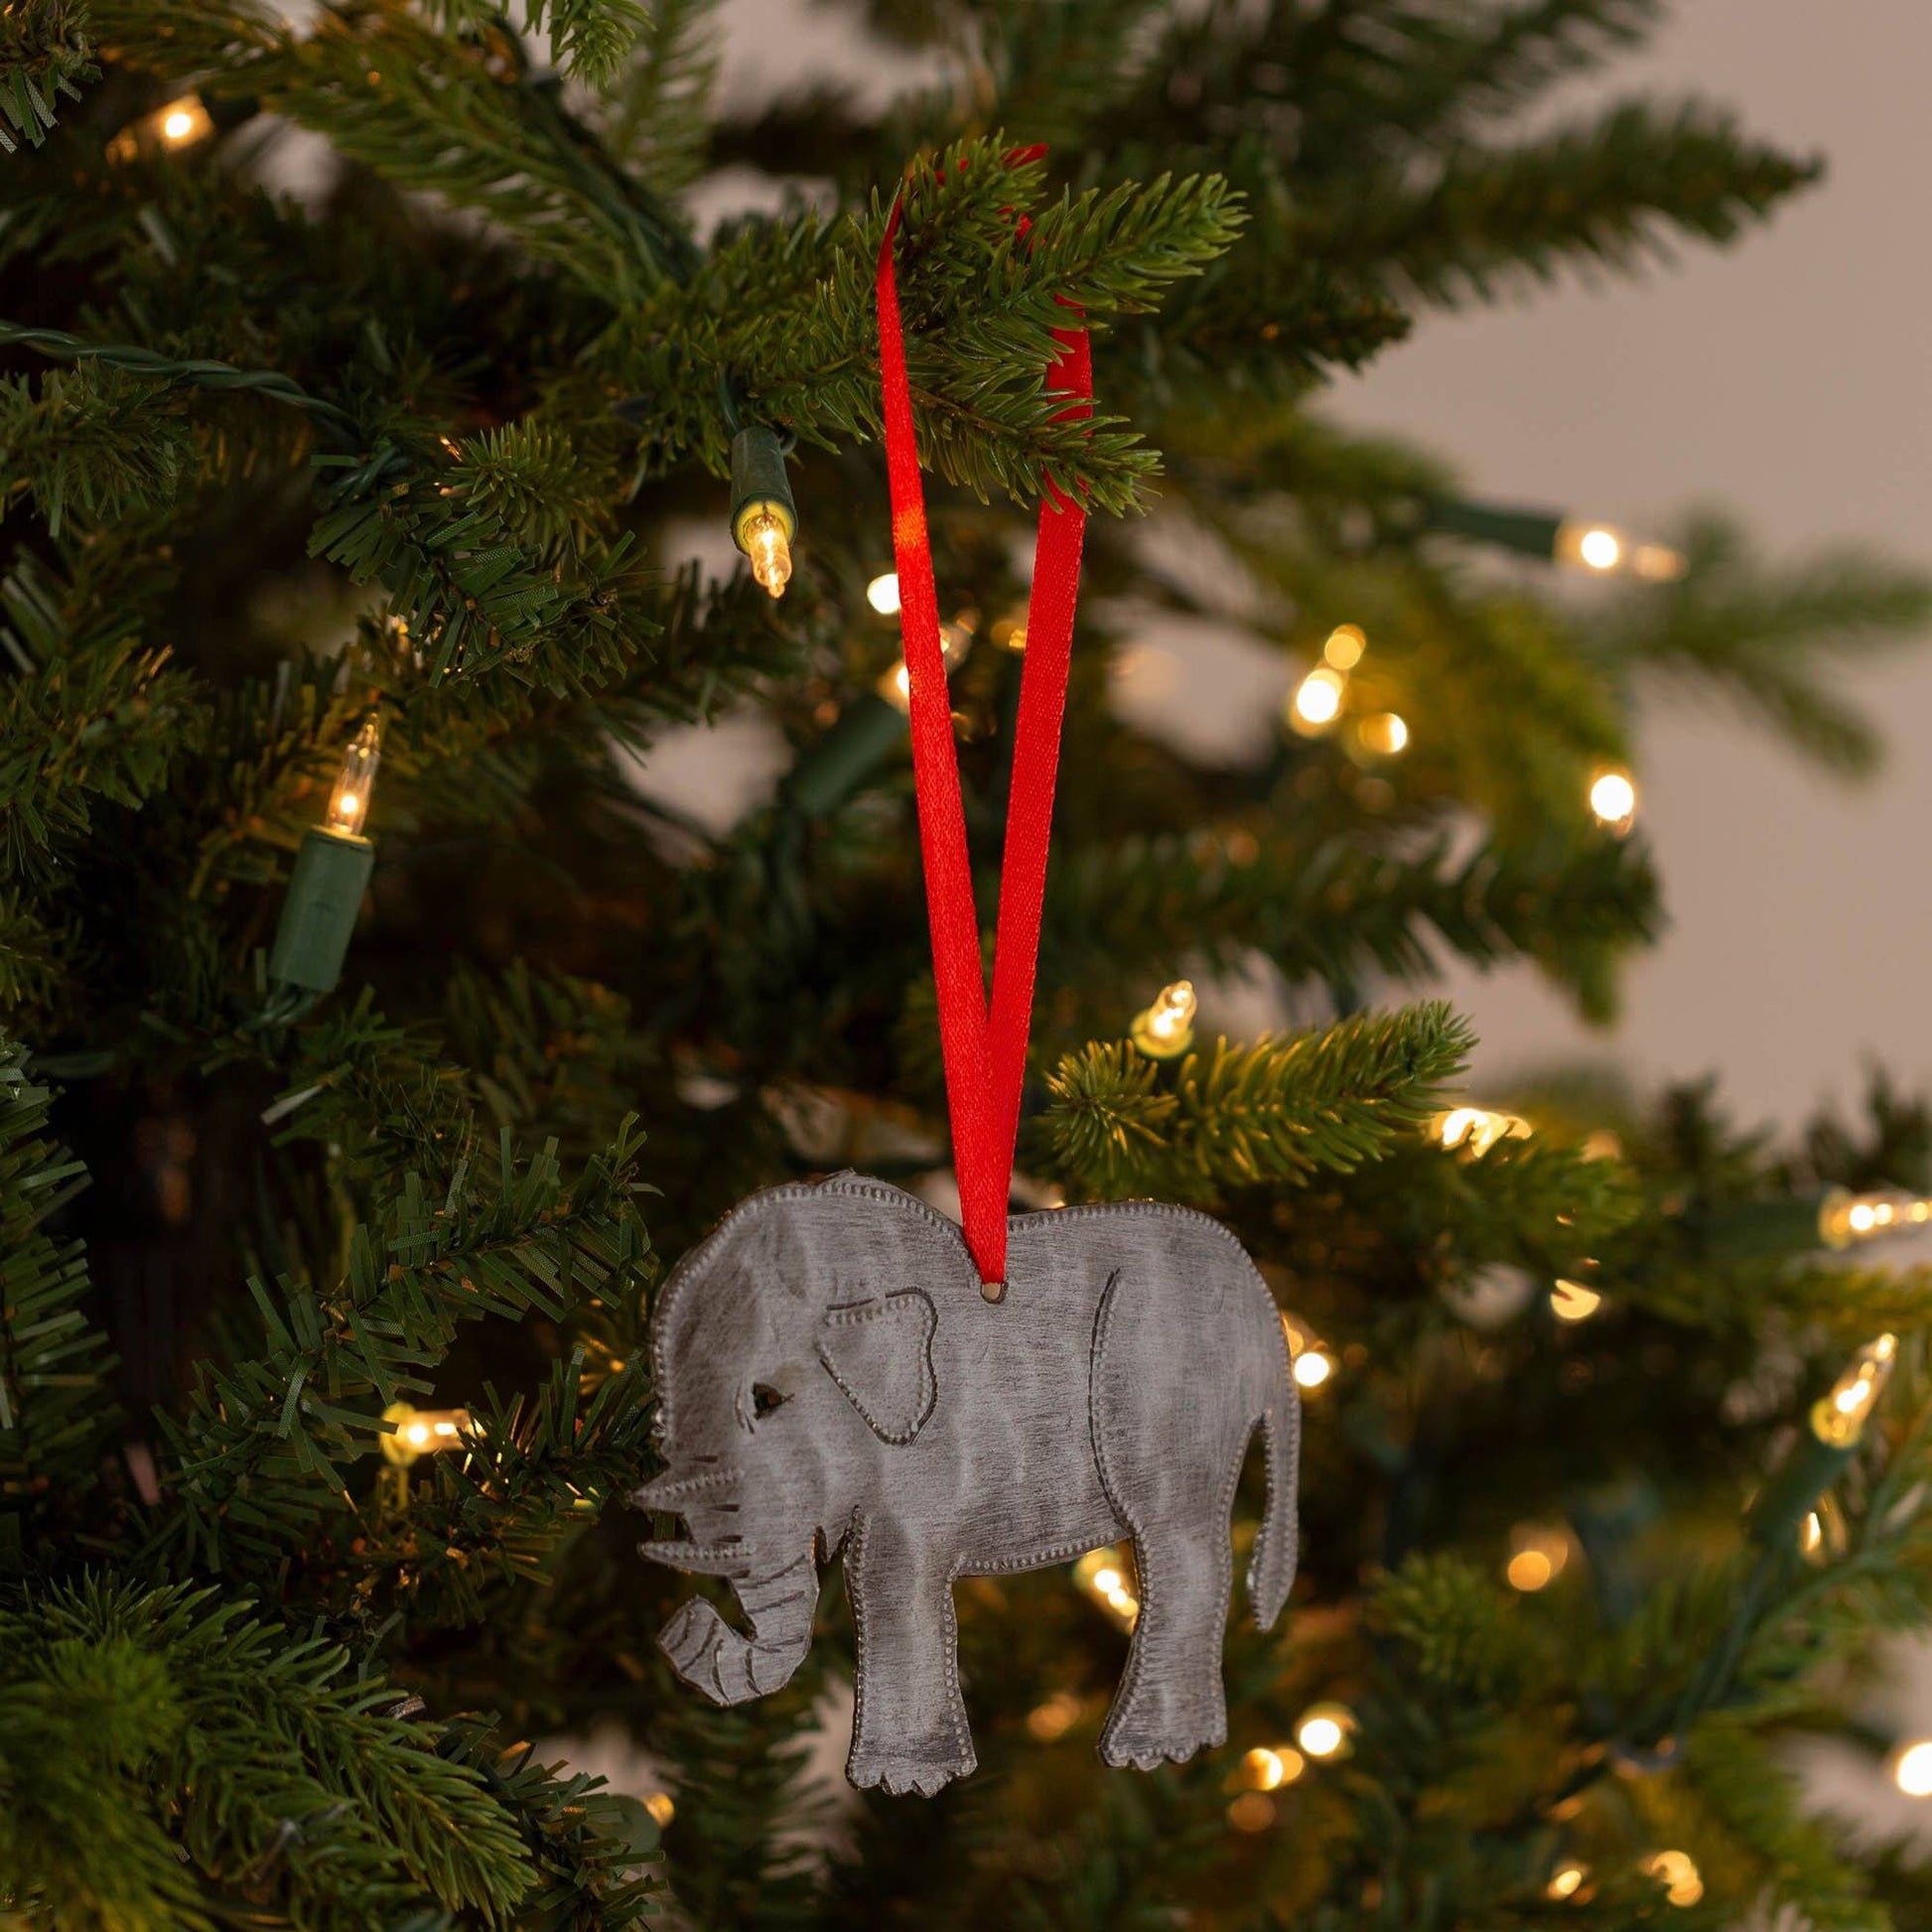 Elephant Recycled Oil Drum Ornament